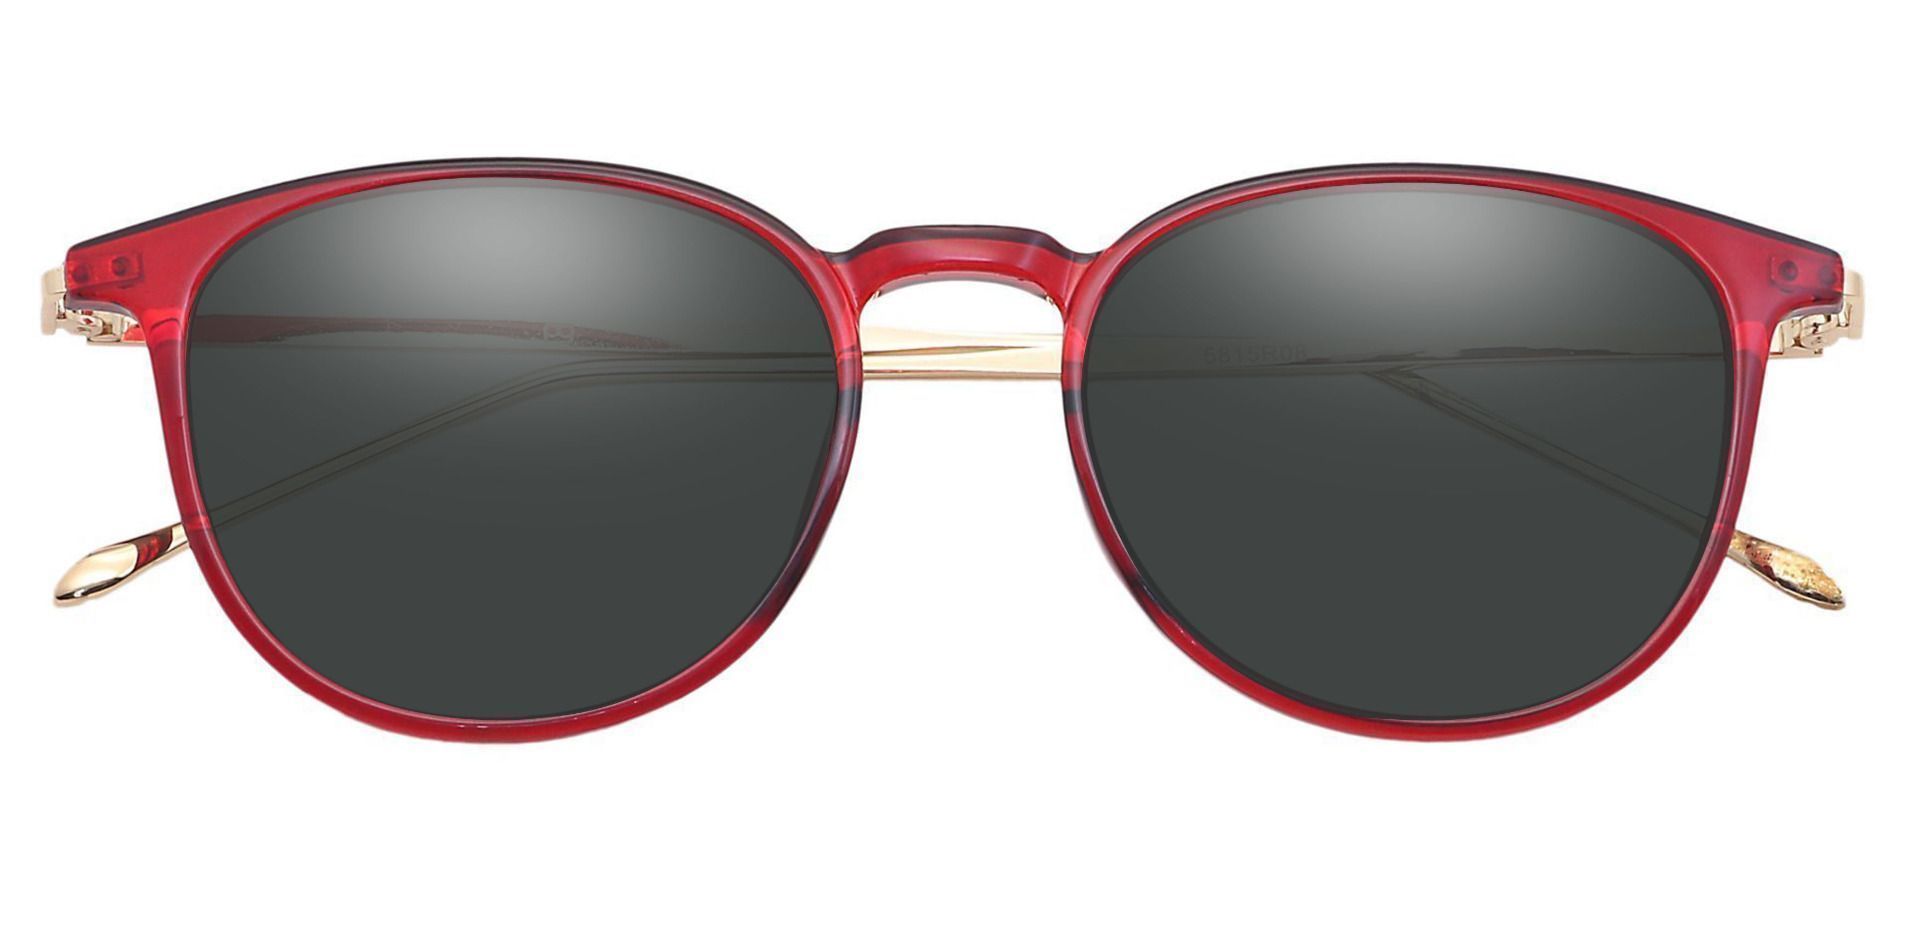 Elliott Round Non-Rx Sunglasses - Red Frame With Gray Lenses